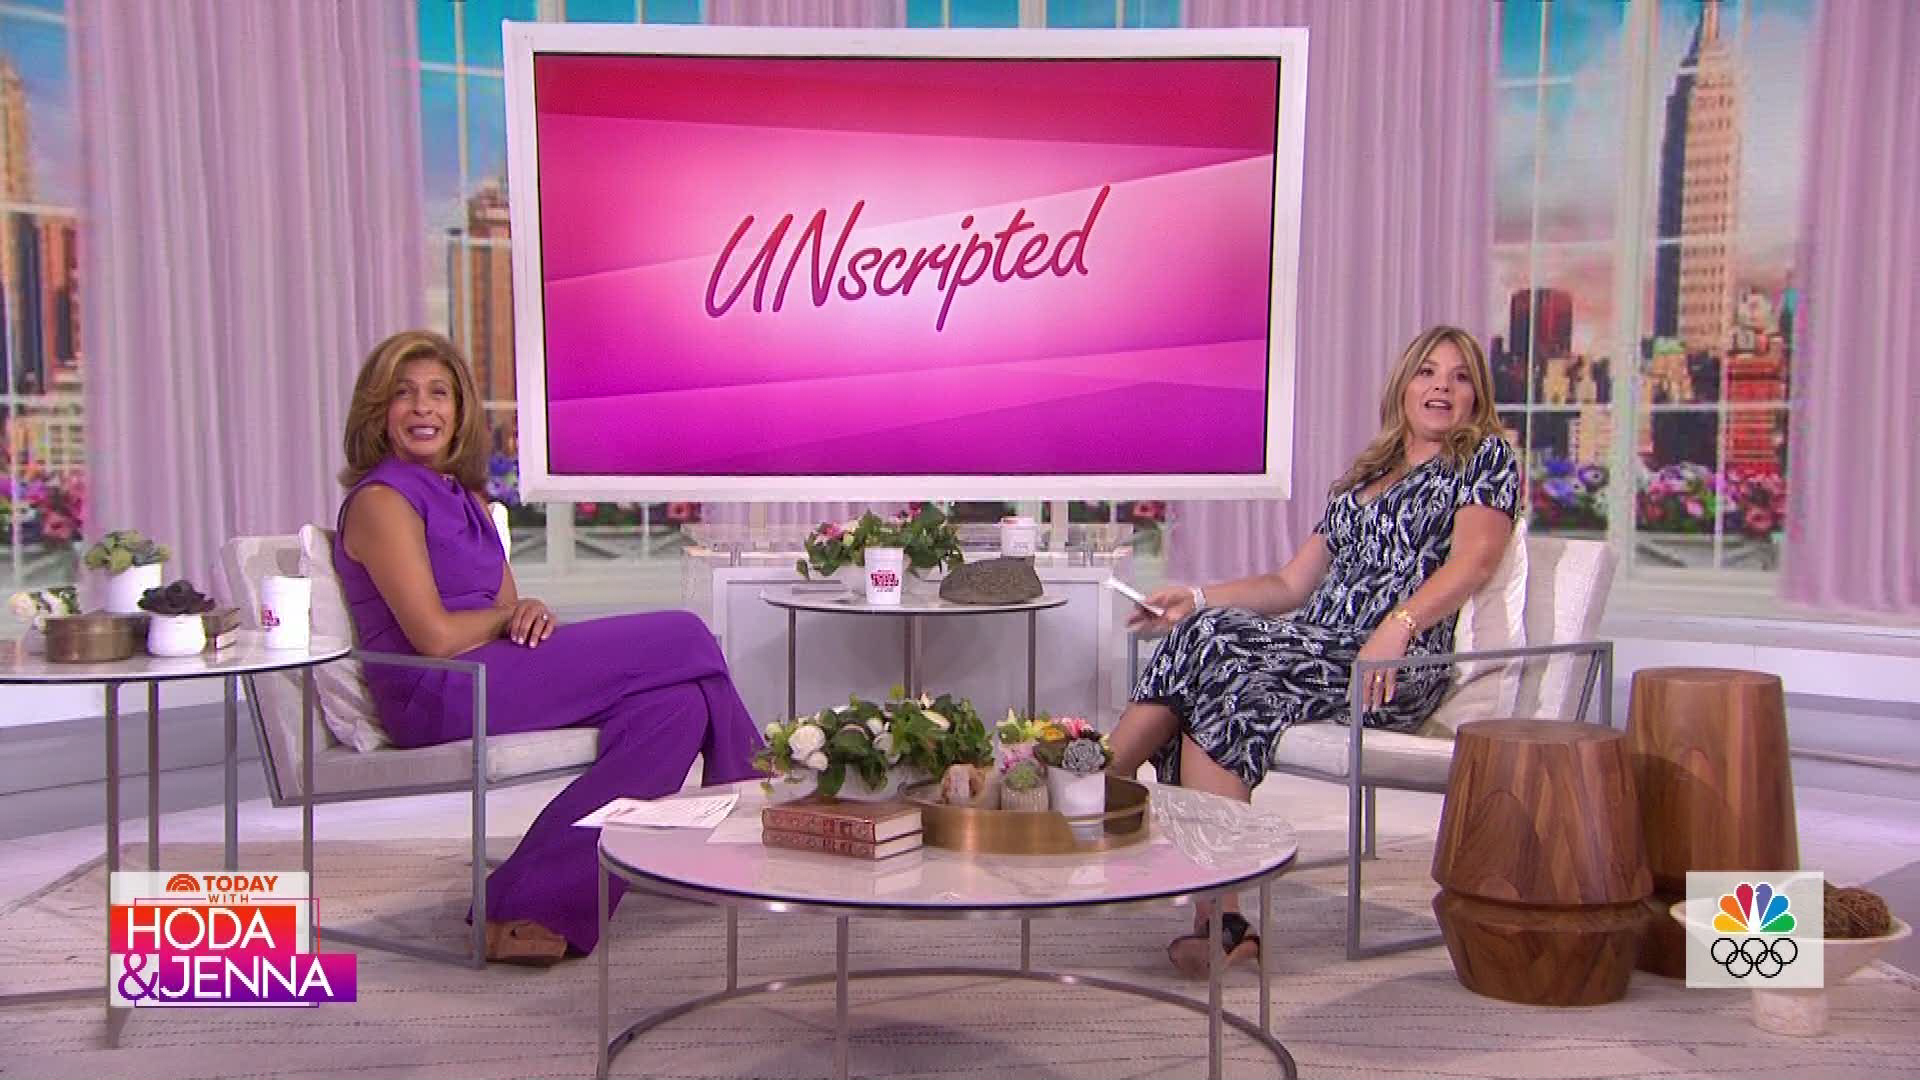 Today With Hoda & Jenna S2021E141 2021-07-19-1000 (13).png